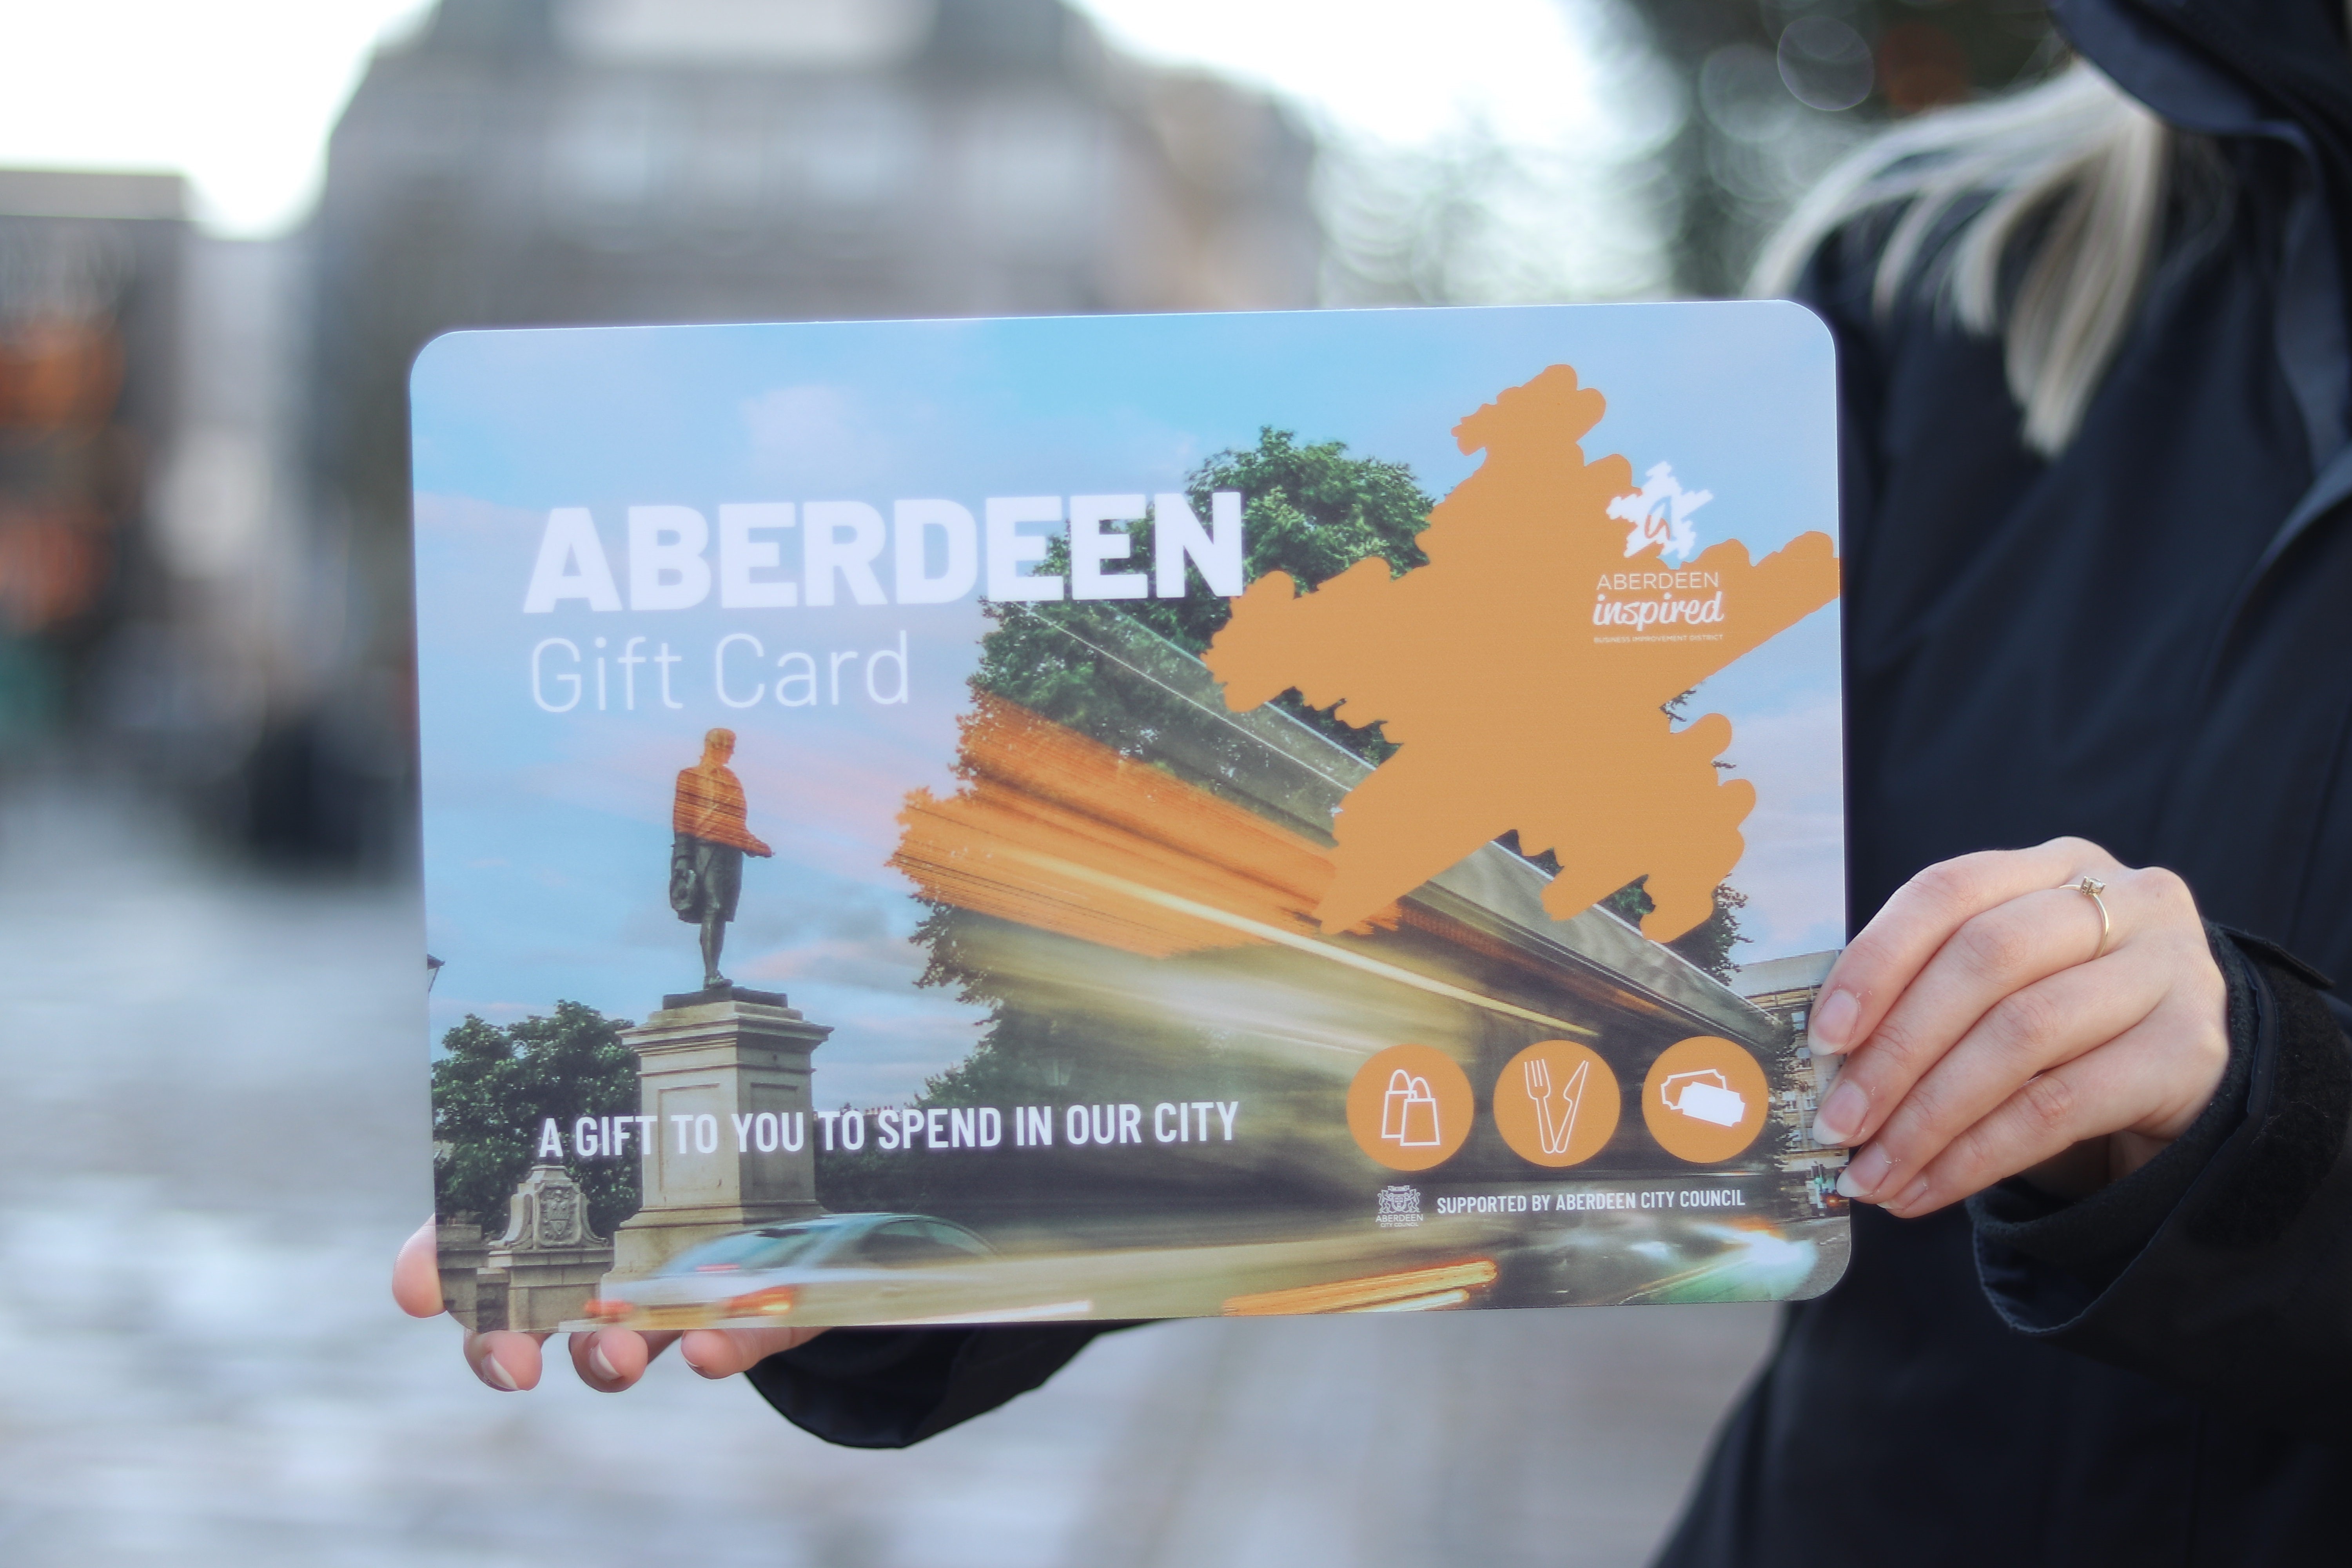 RGU MAKES £20,000 INVESTMENT IN CITY THROUGH ABERDEEN GIFT CARD